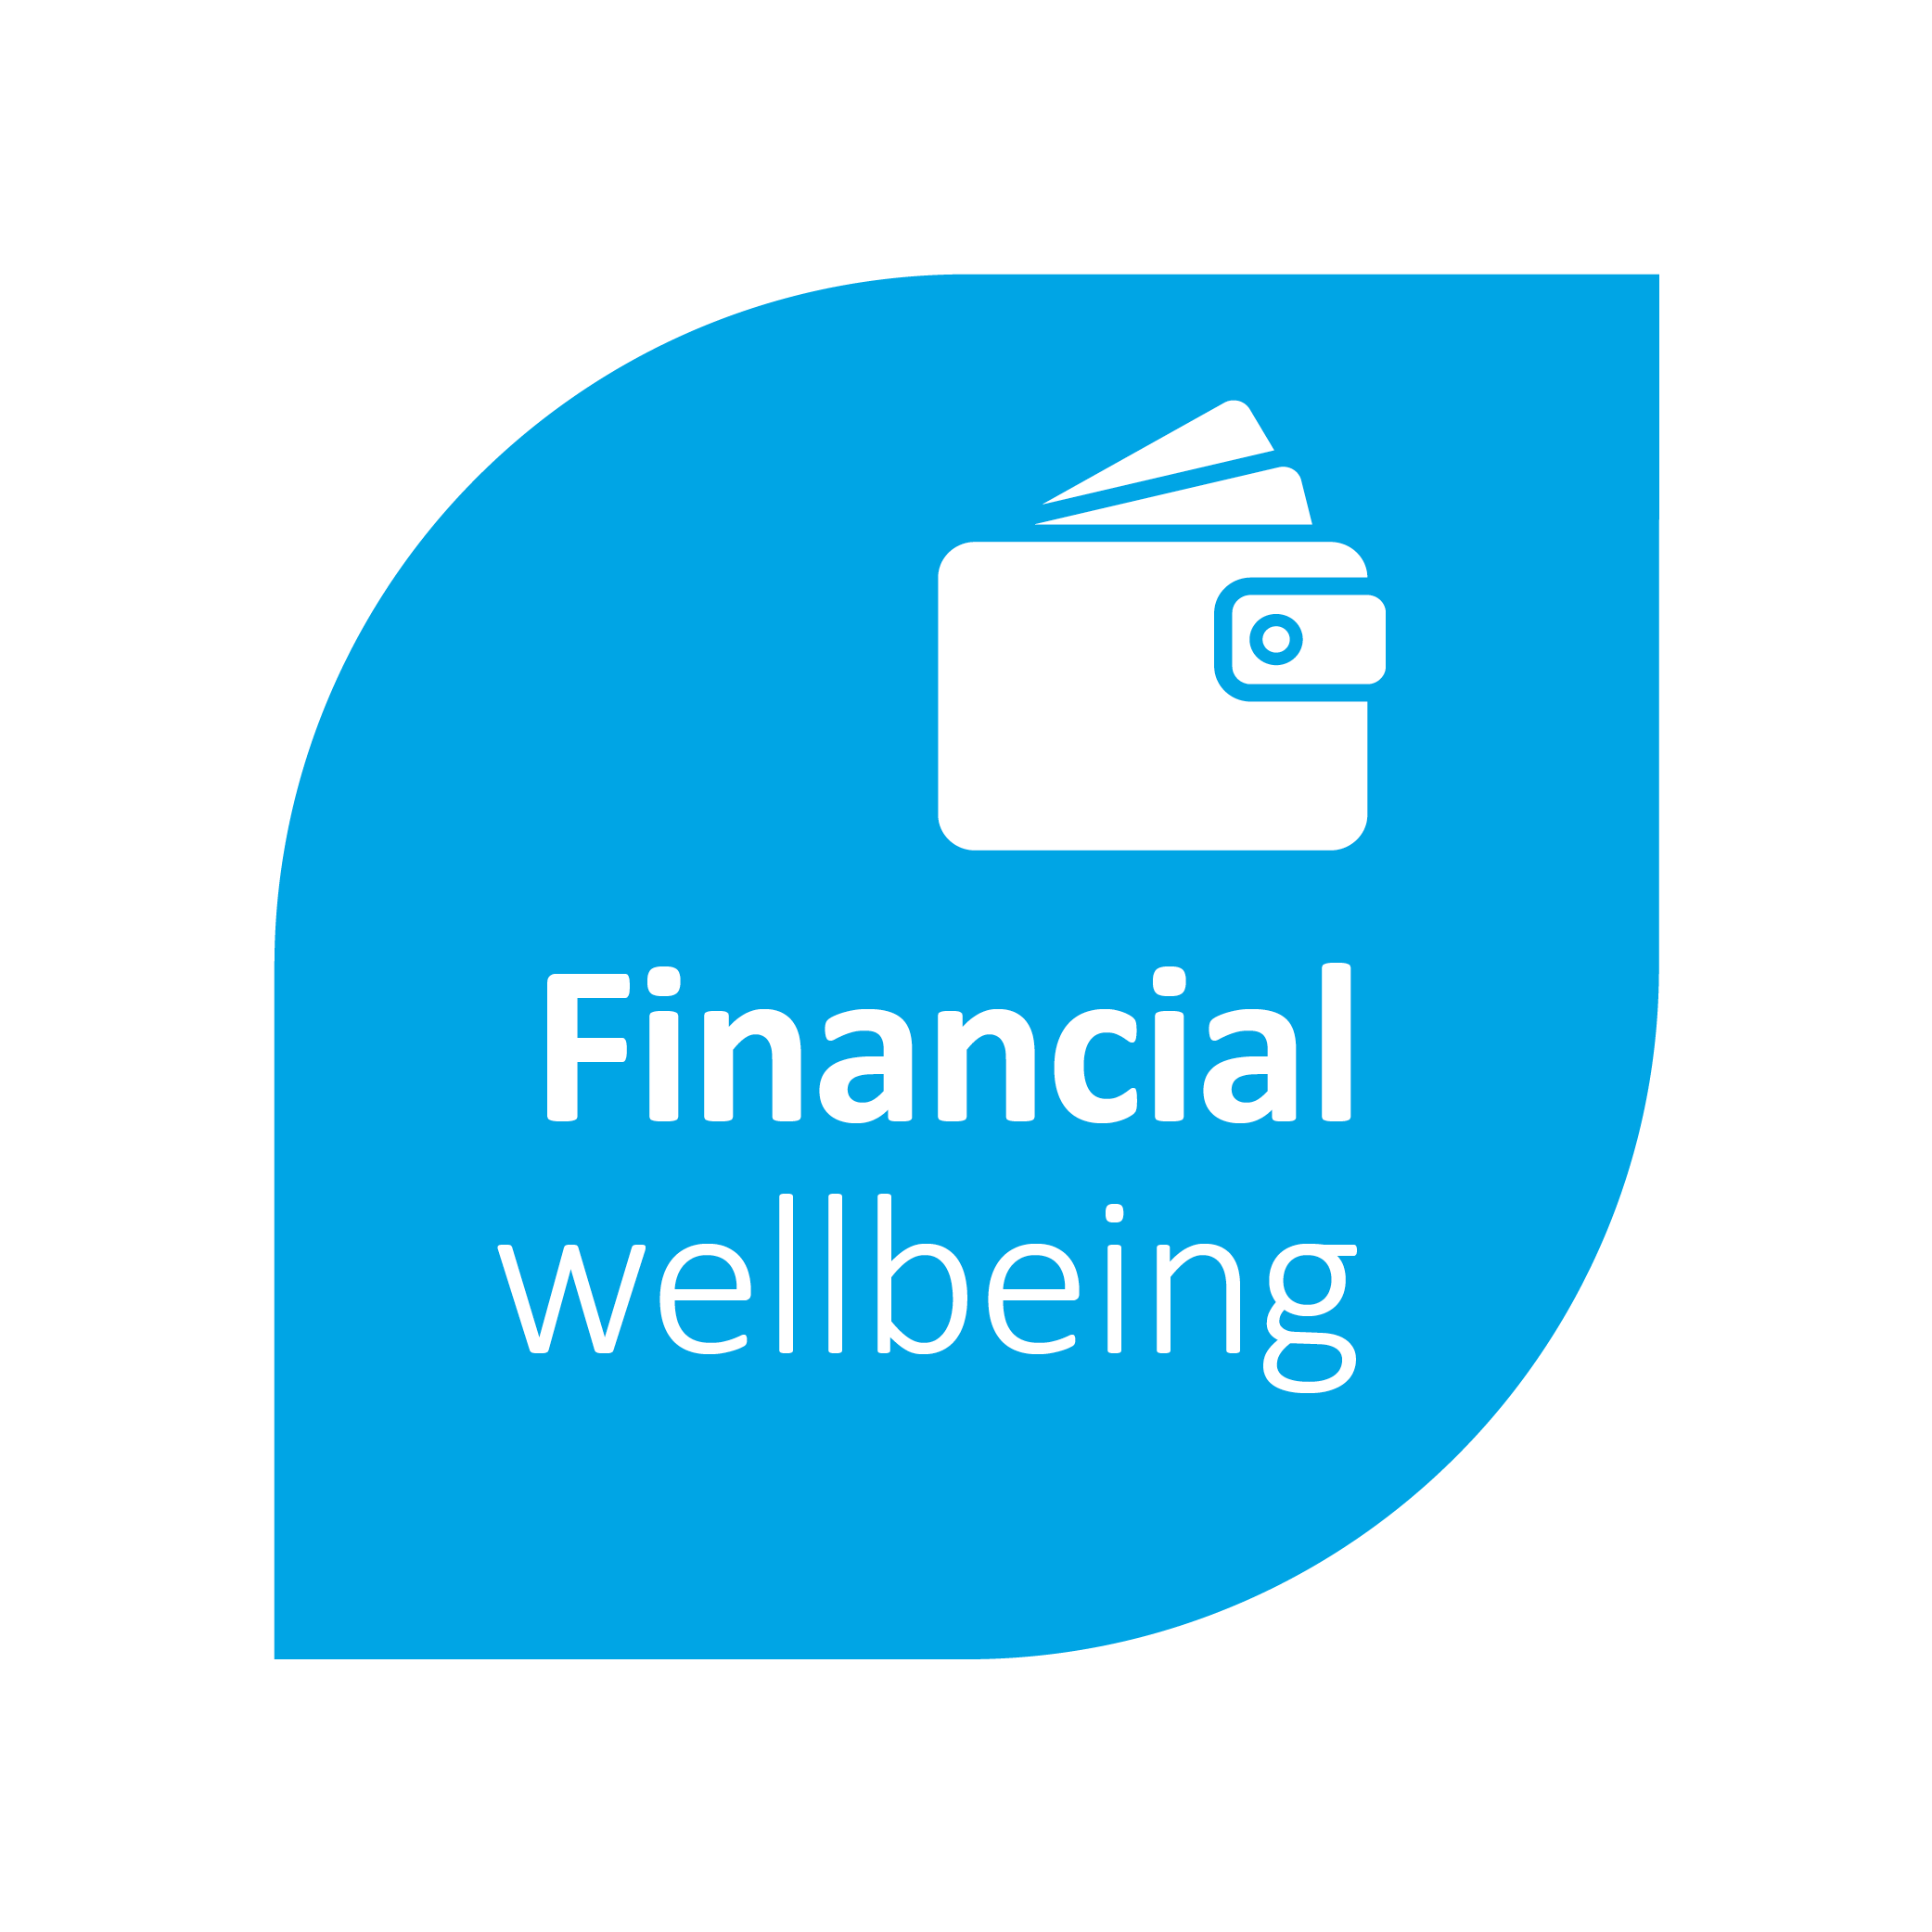 Text that reads 'Financial wellbeing' in a bright blue leaf shaped object with a wallet image inside it